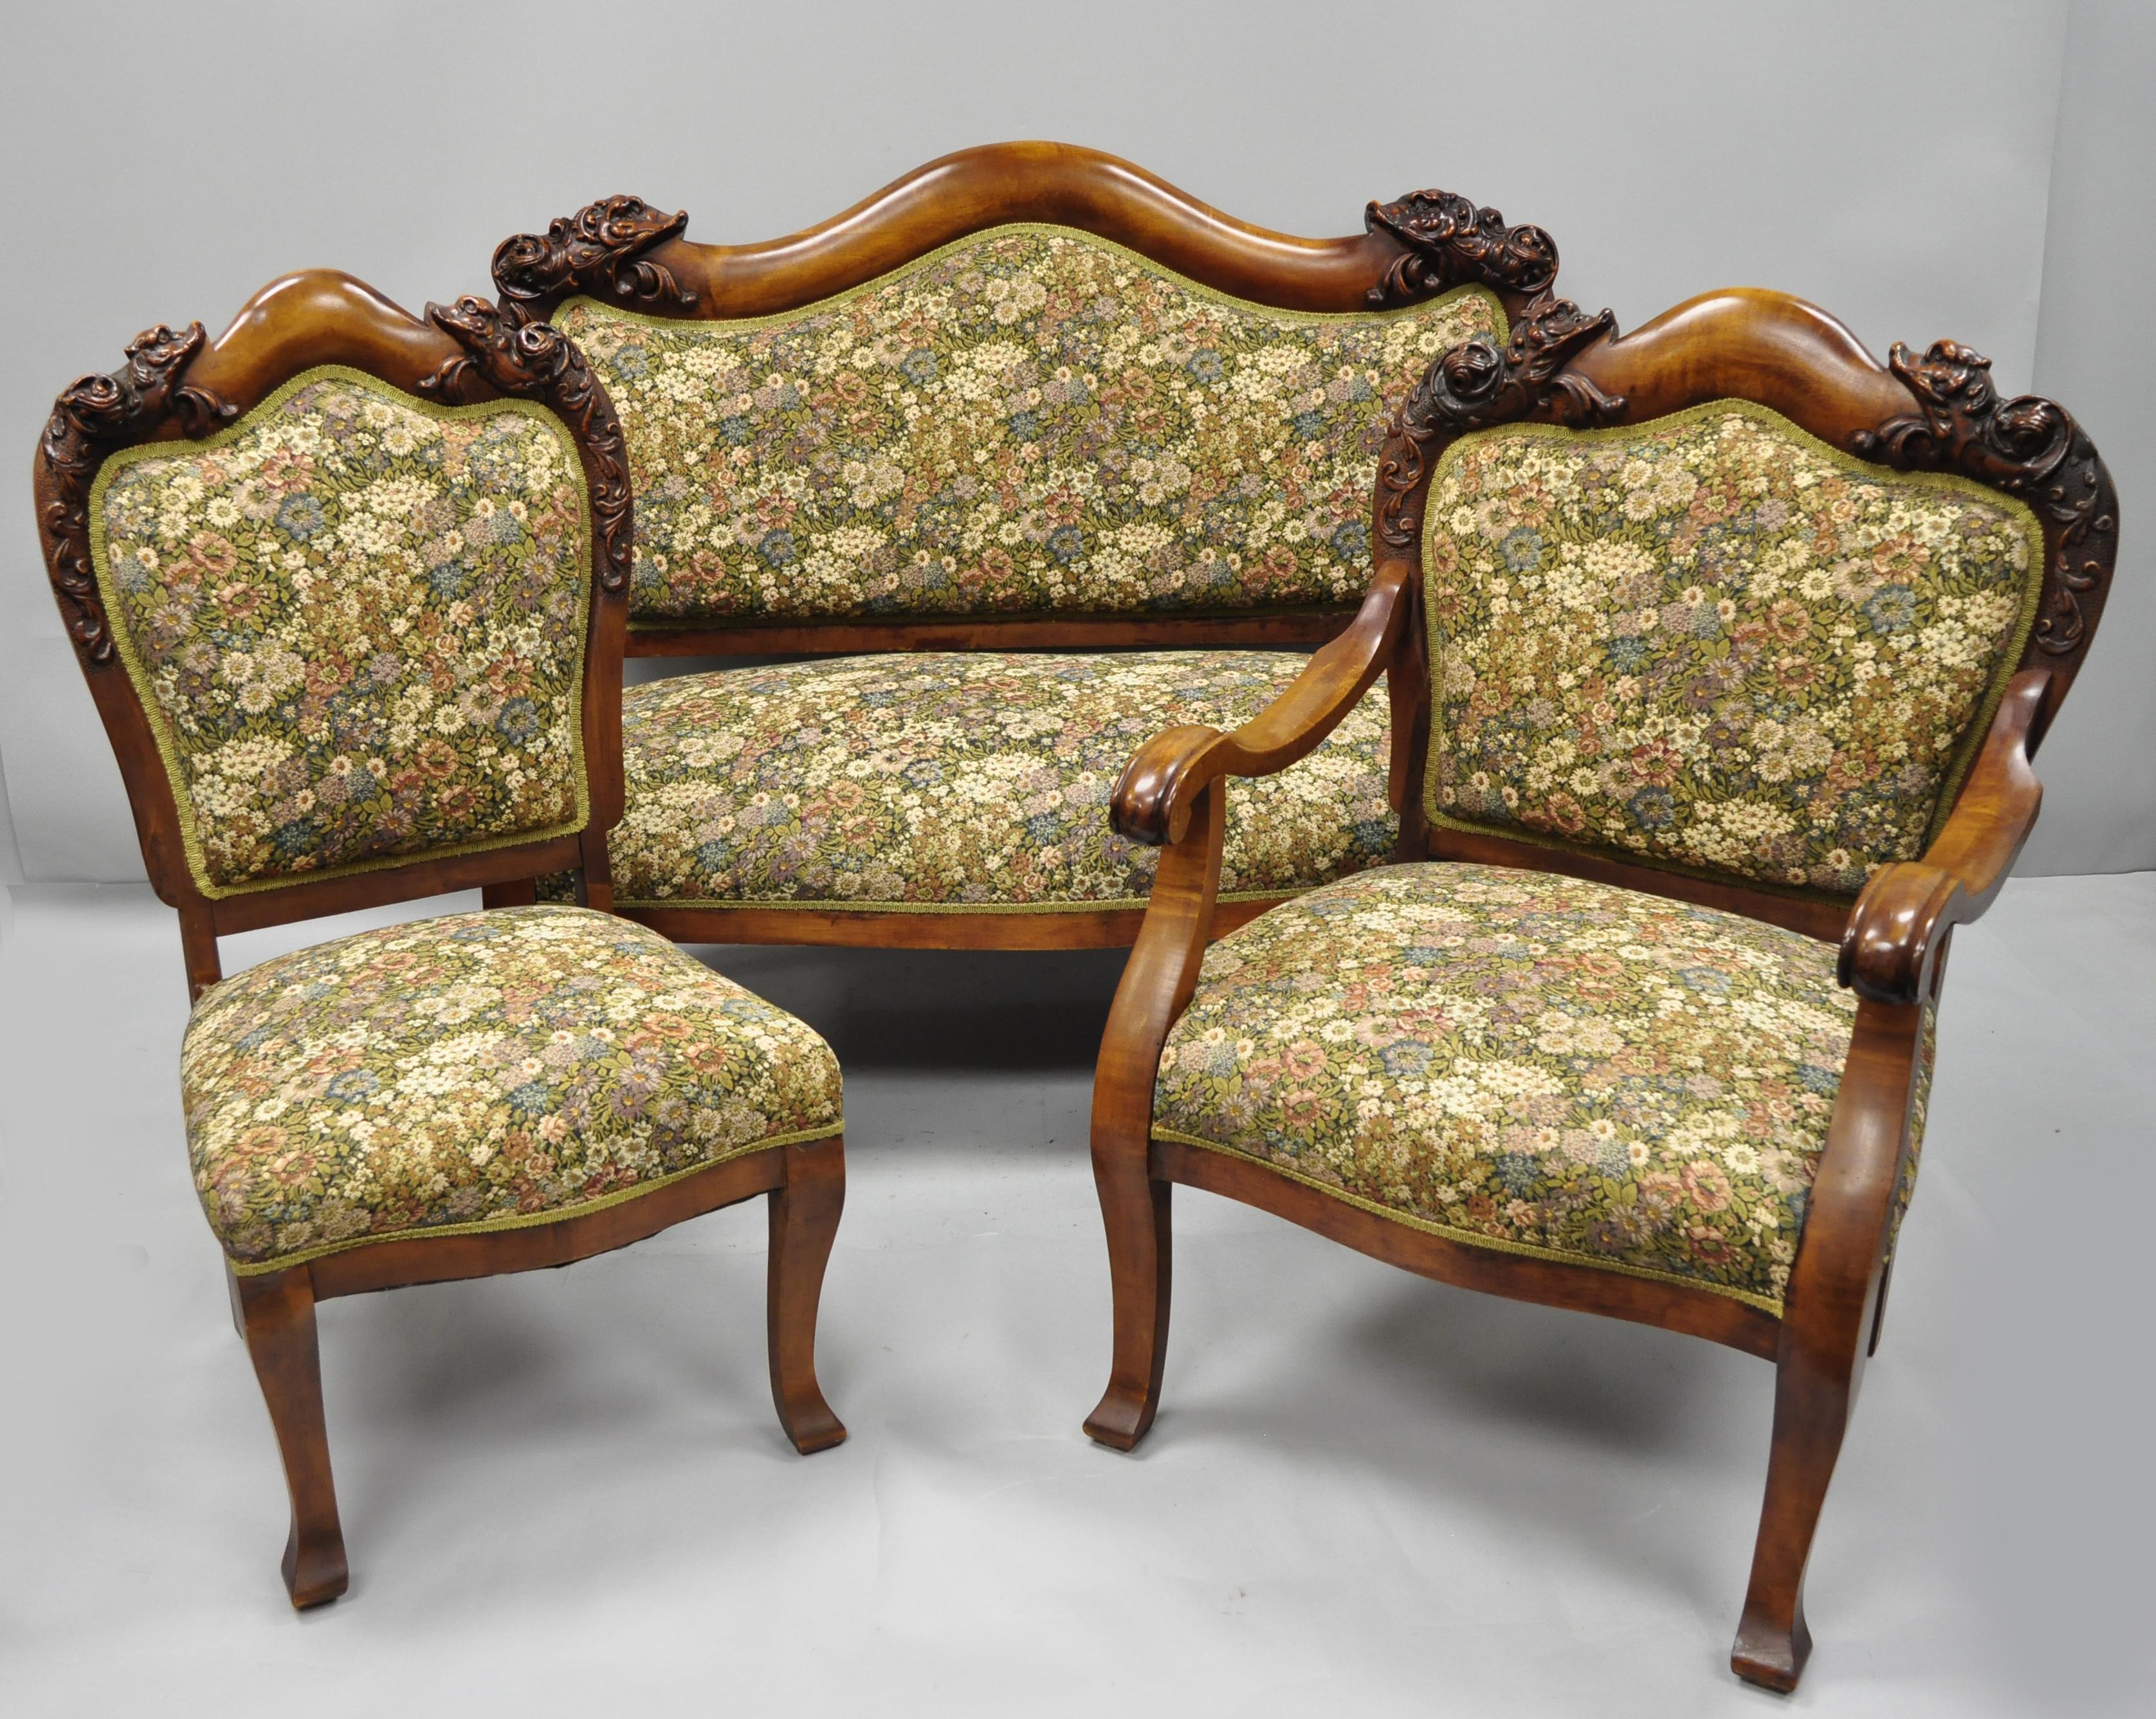 3 Pc Victorian Empire Mahogany Dolphin Carved Parlor Set Settee Armchair & Chair 3